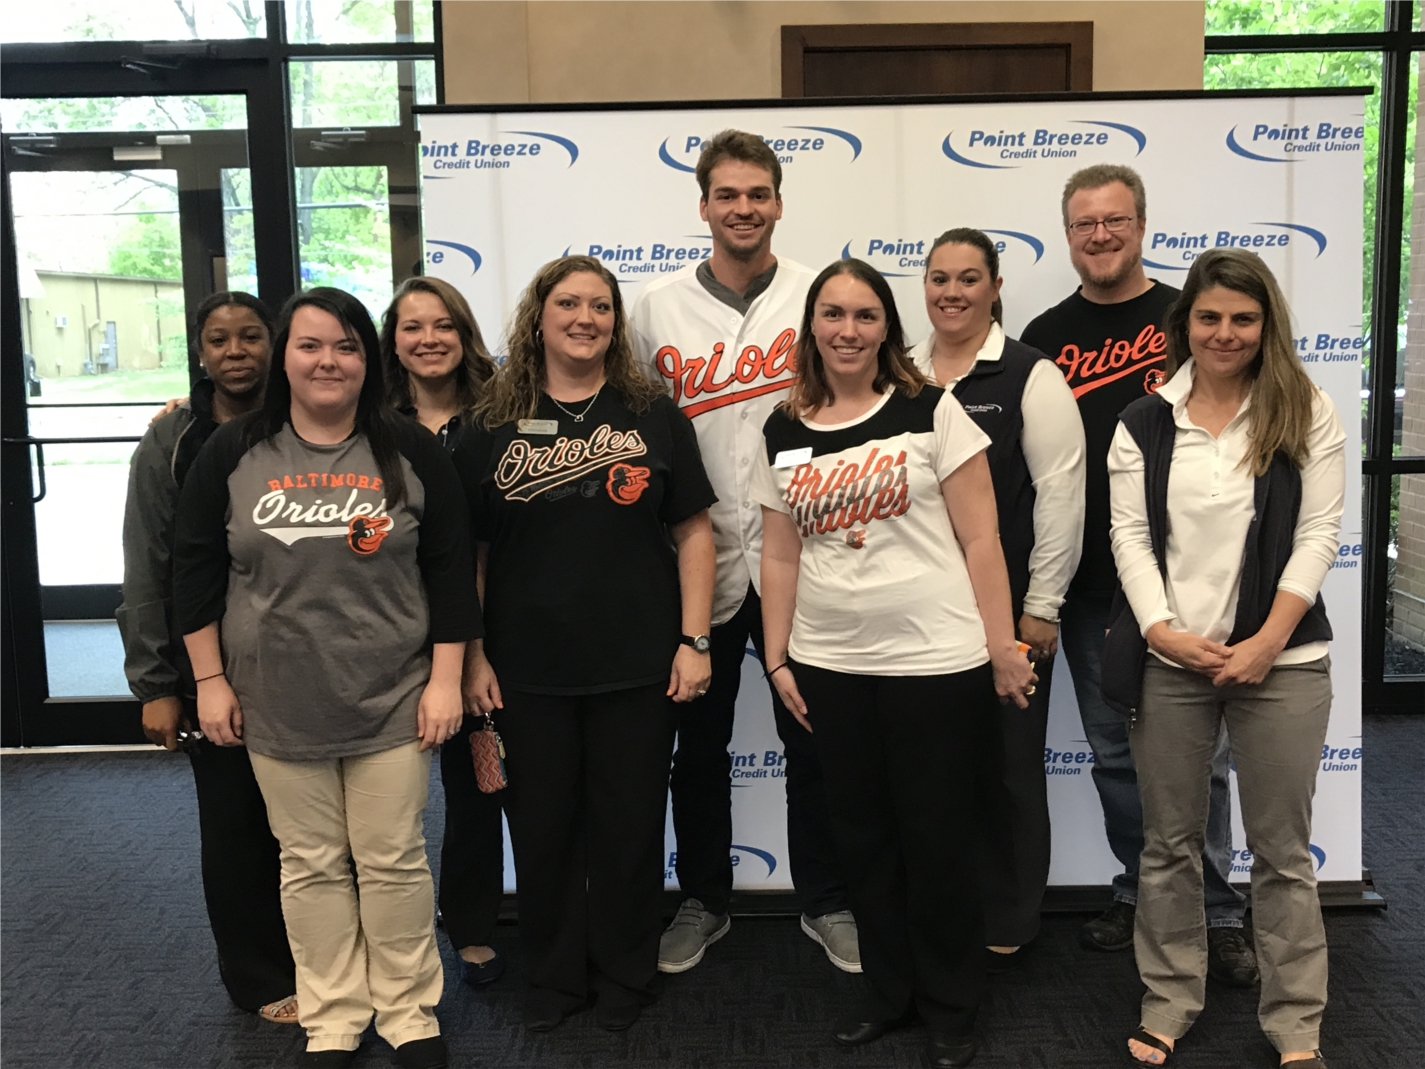 Orioles Outfielder Trey Mancini greets employees and members and signs autographs at Point Breeze Credit Union in Bel Air.